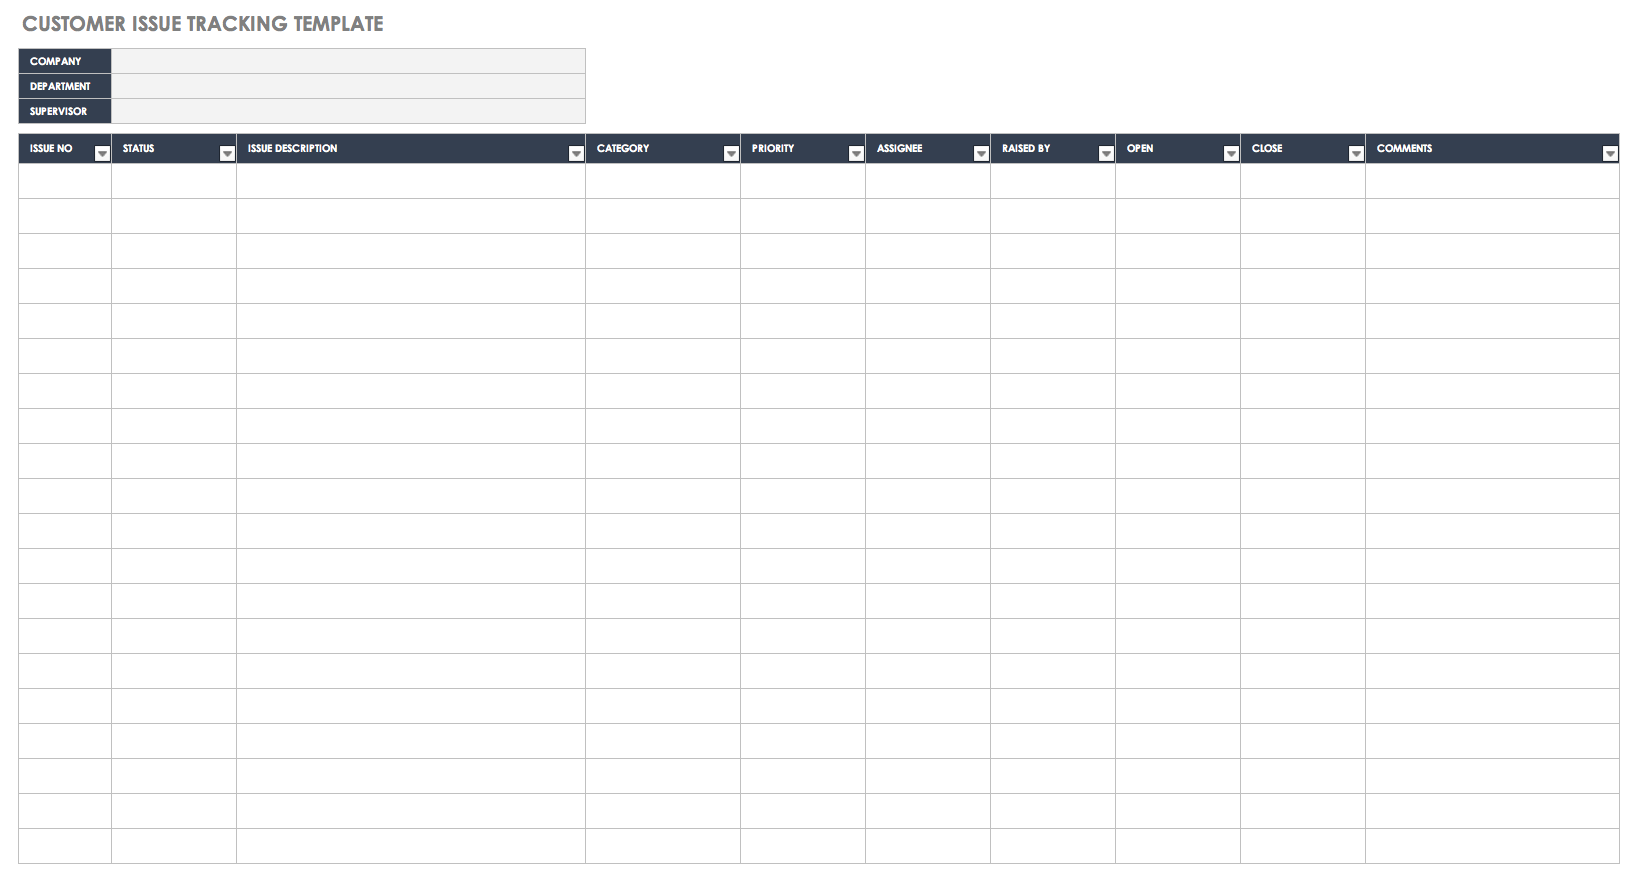 Customer Issue Tracking Template